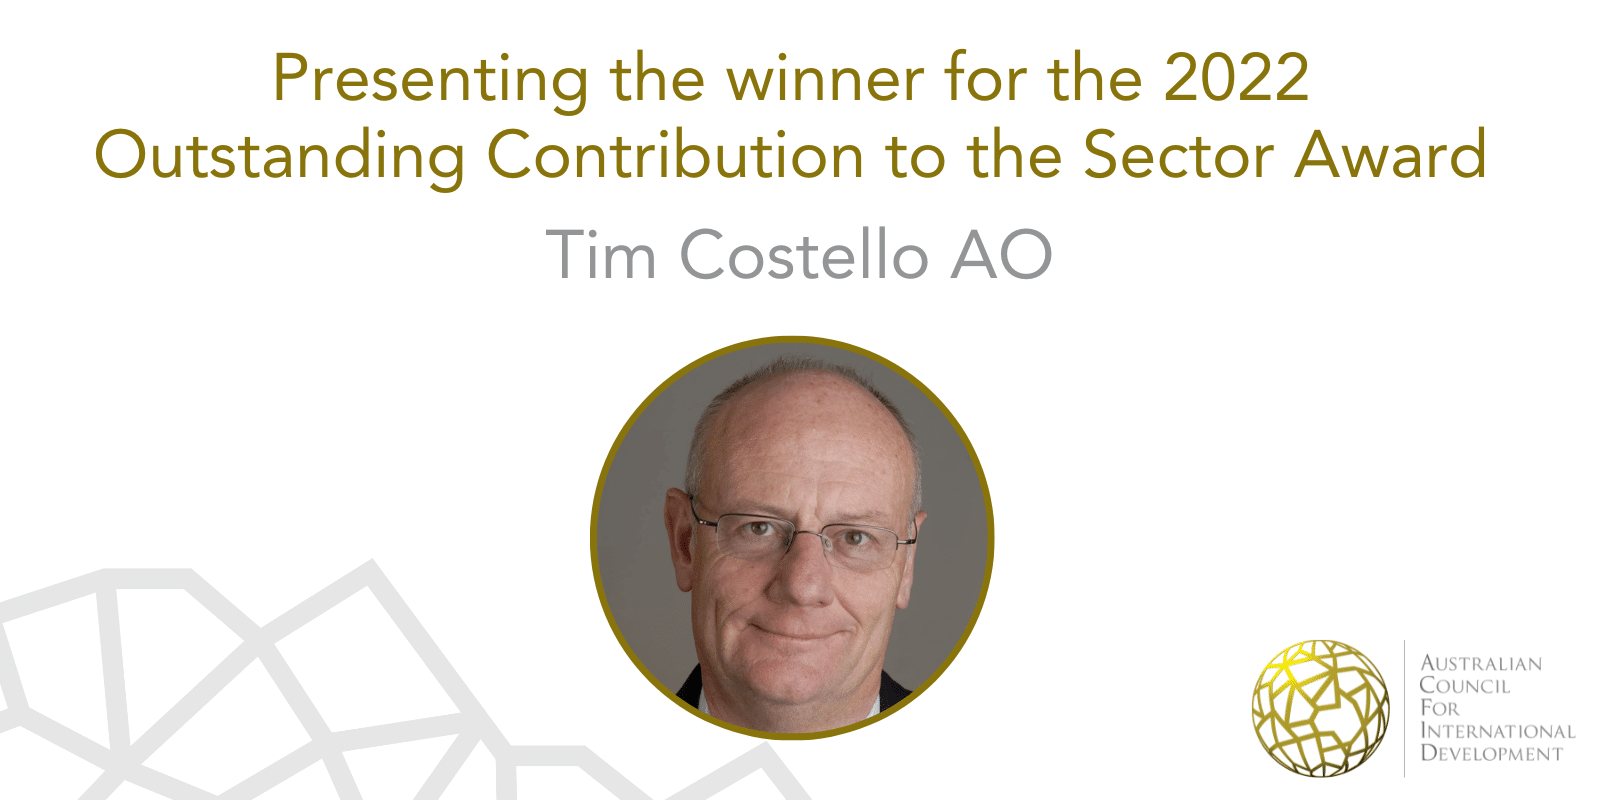 Presenting the winner for the 2022 Outstanding Contribution to the Sector Award